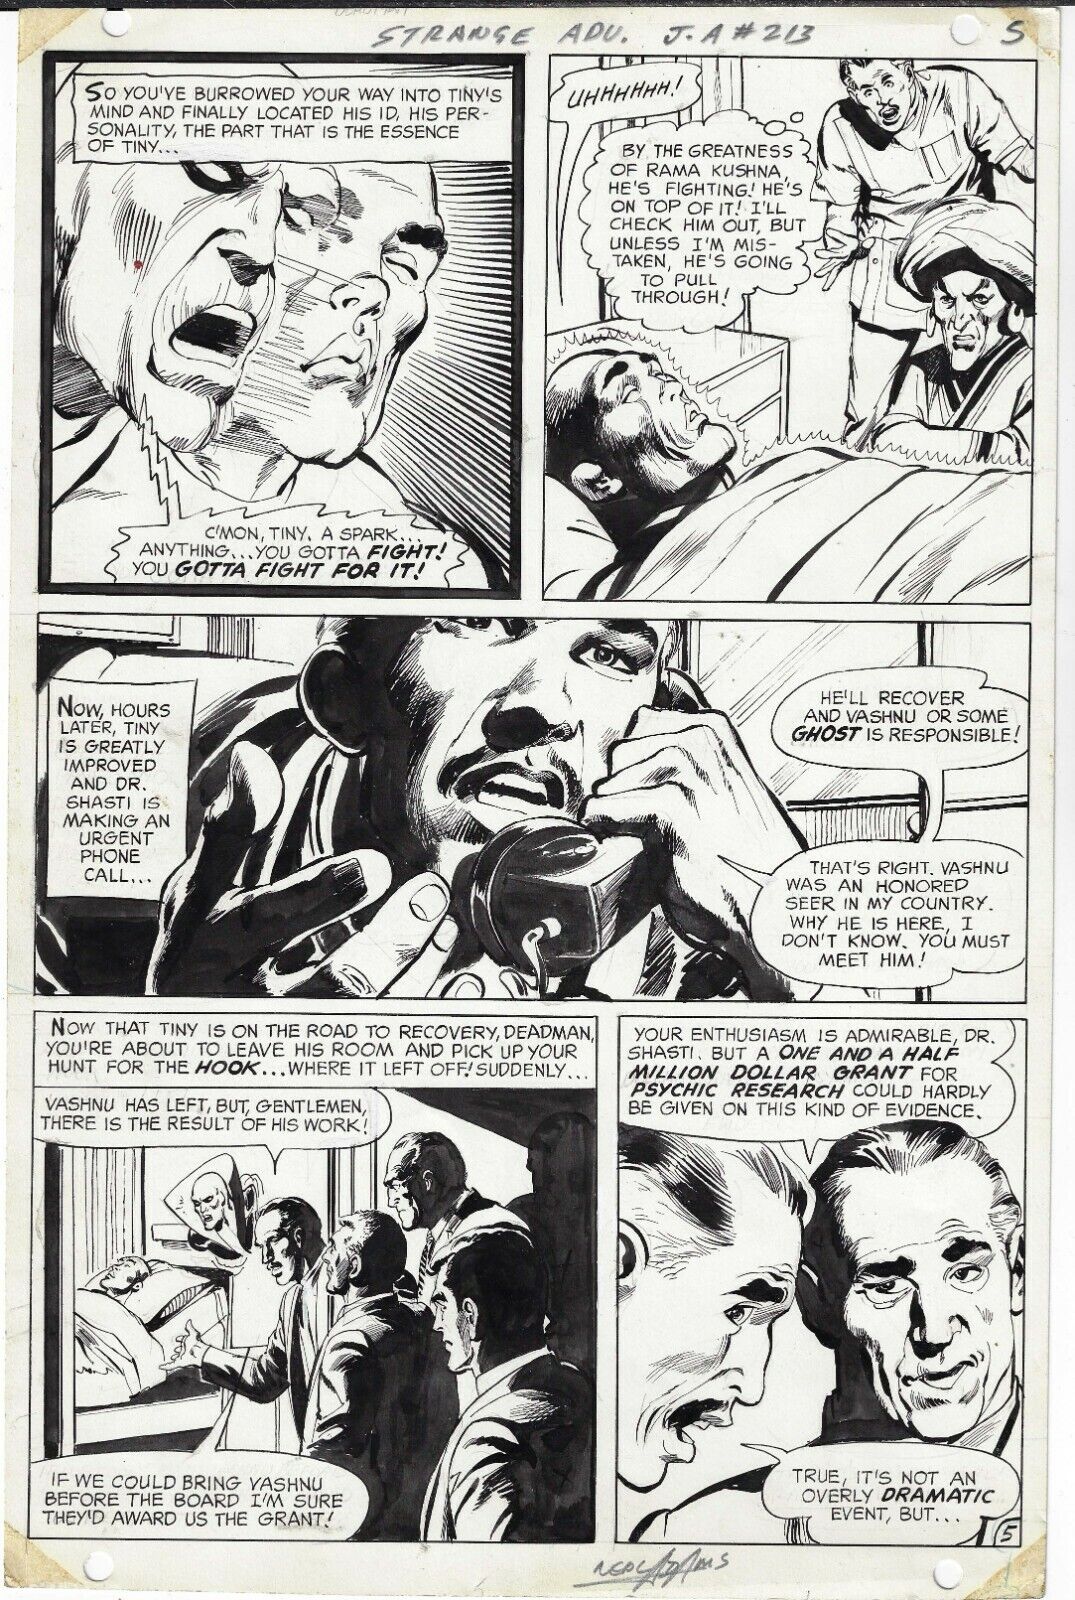 STRANGE ADVENTURES # 213 PAGE 5 NEAL ADAMS DEADMAN 1968 CLASSIC CALL FROM BEYOND